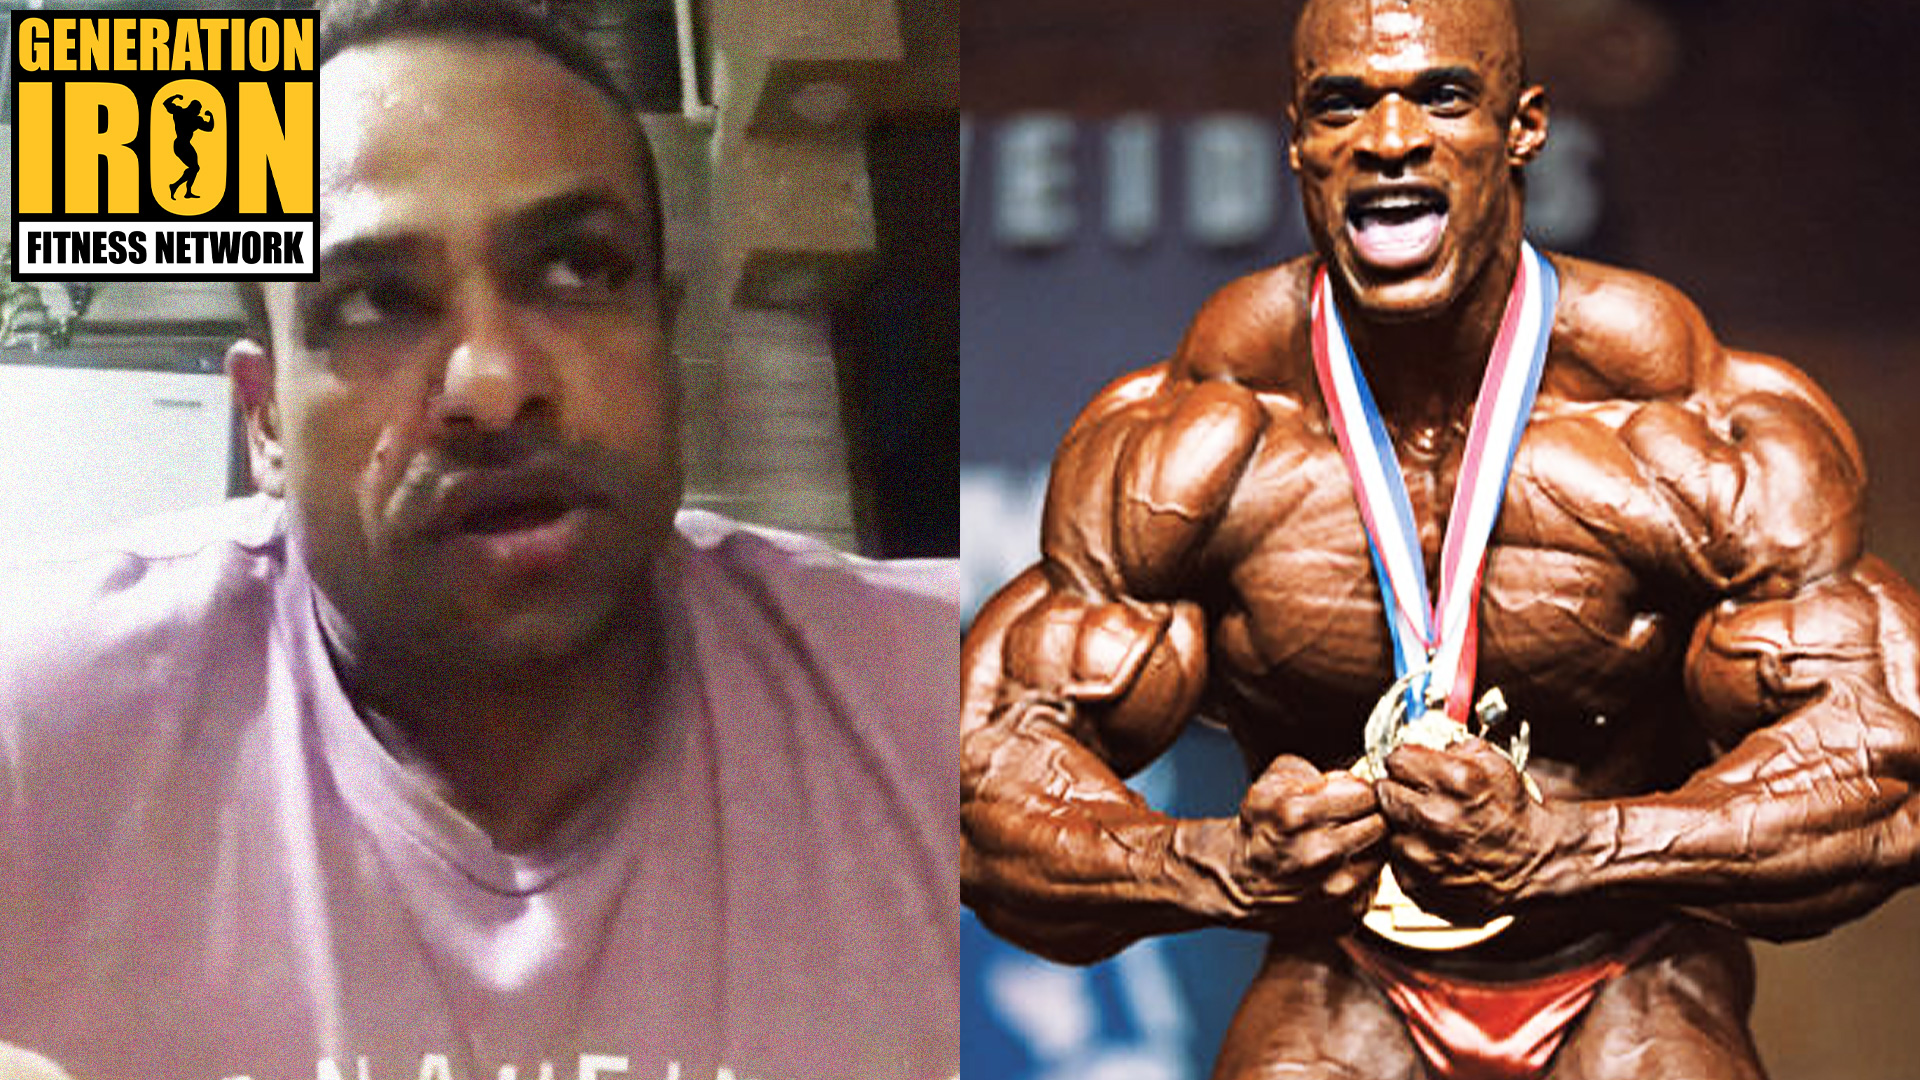 Mohamed El Emam: Ronnie Coleman’s Best Package Would Easily Win Olympia Today